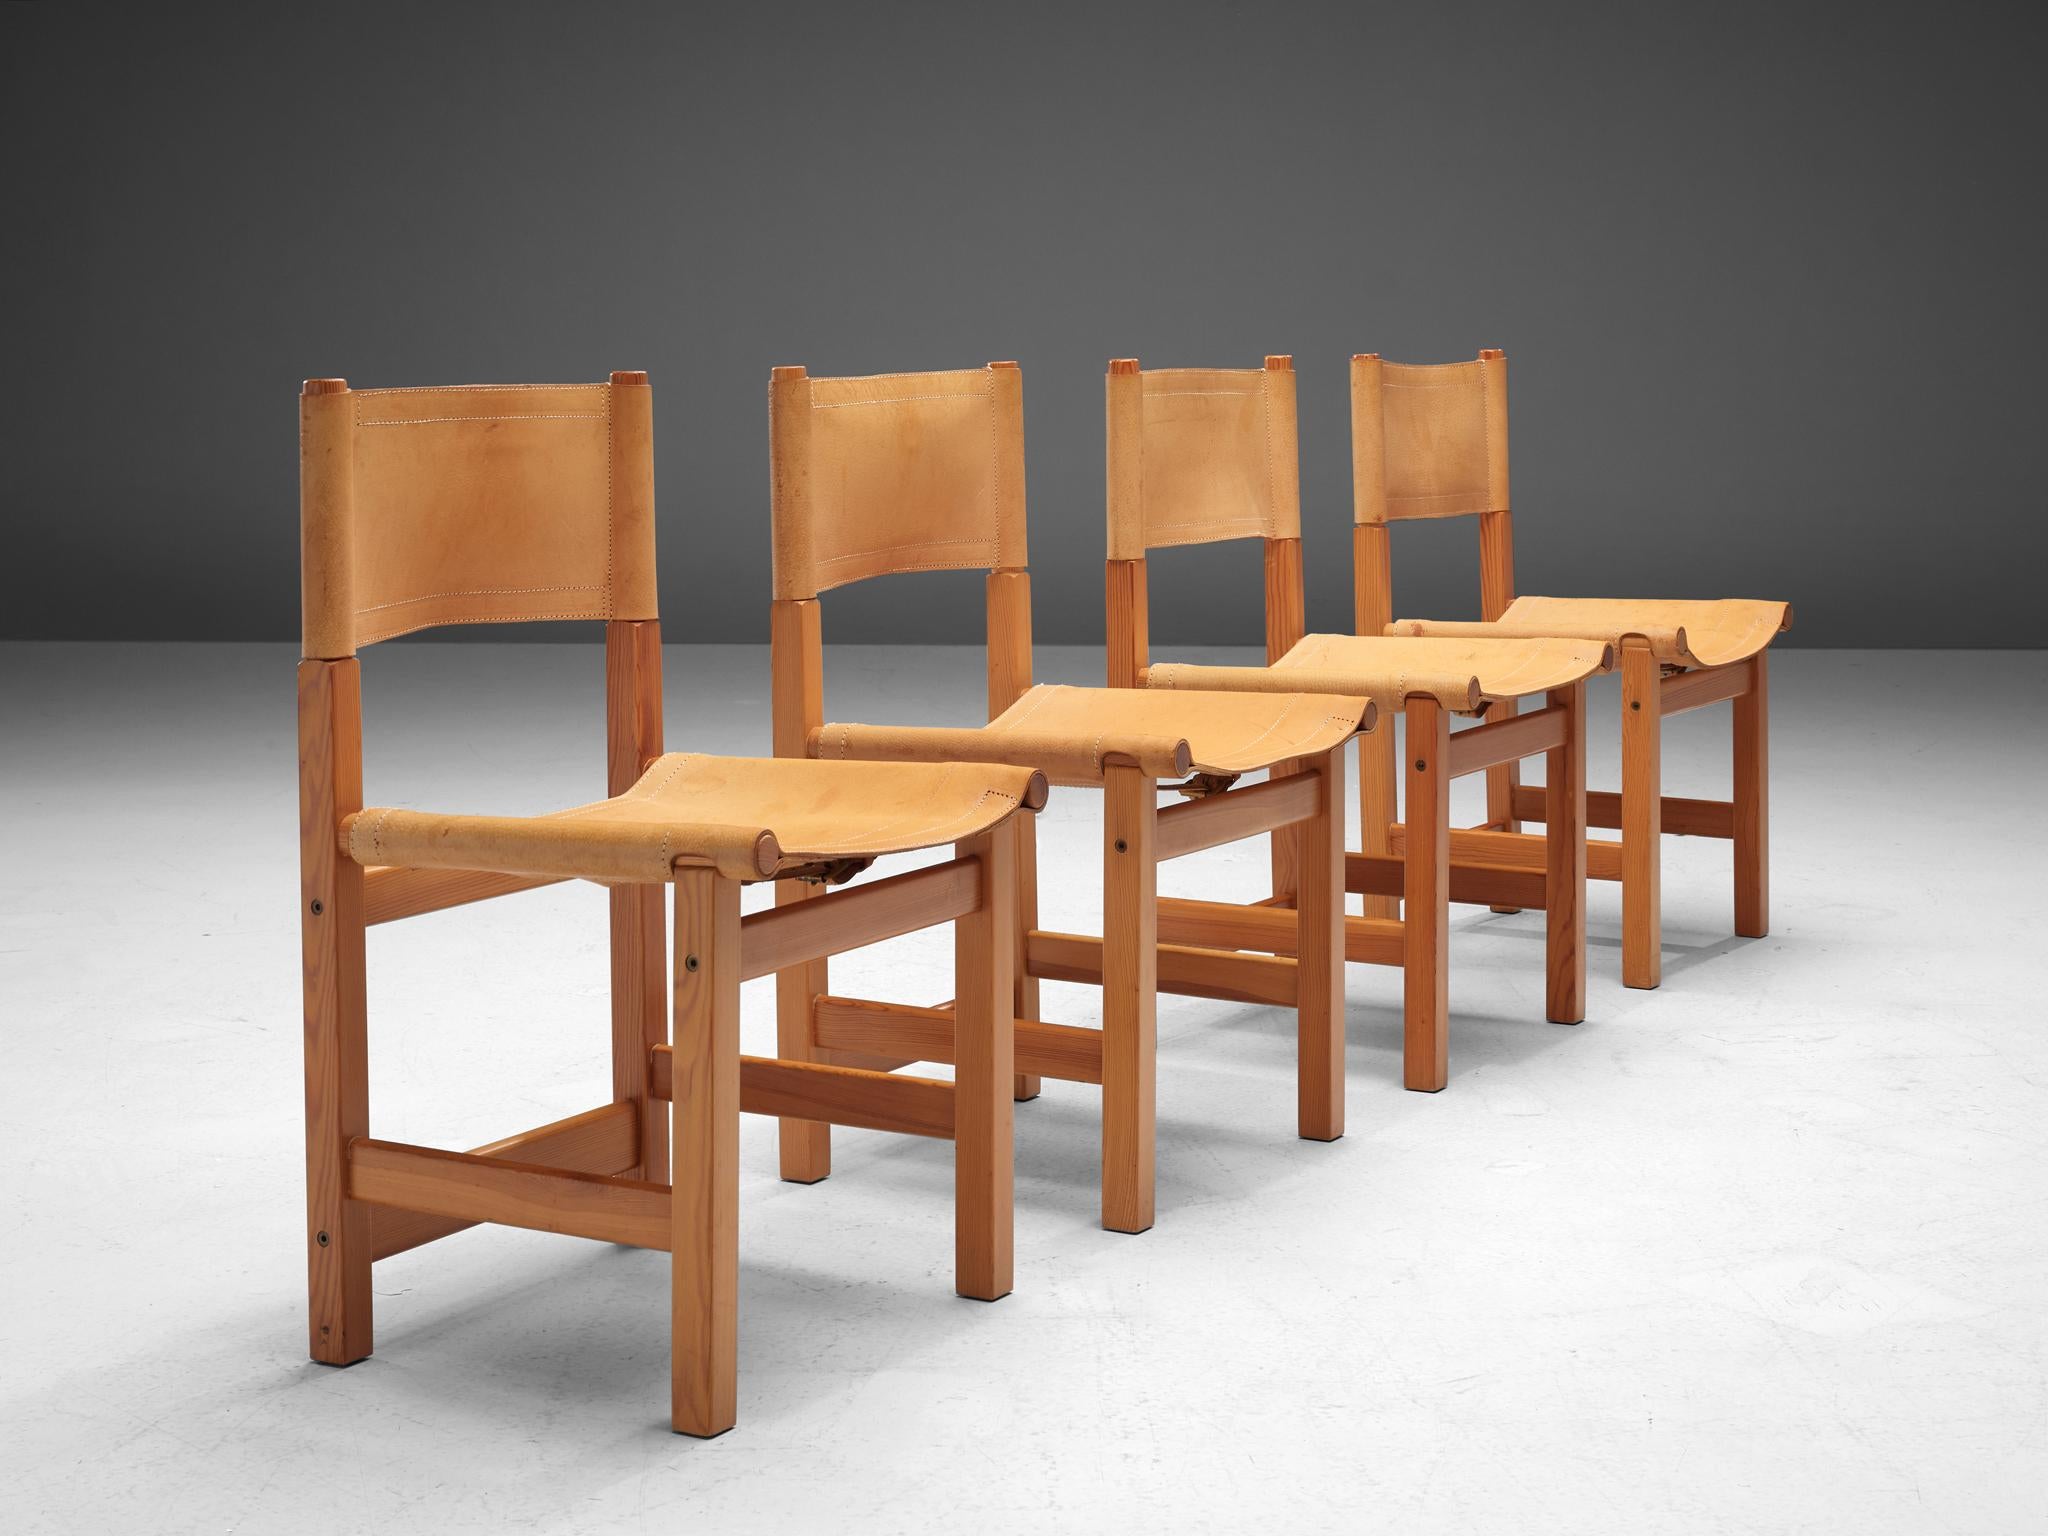 Set of four dining chairs, pine, cognac leather, Sweden, 1970s

A set of four beautiful and natural dining chairs produced in Sweden in the 1970s. The design of these chairs displays a robust appearance, yet these chairs have a soft and organic